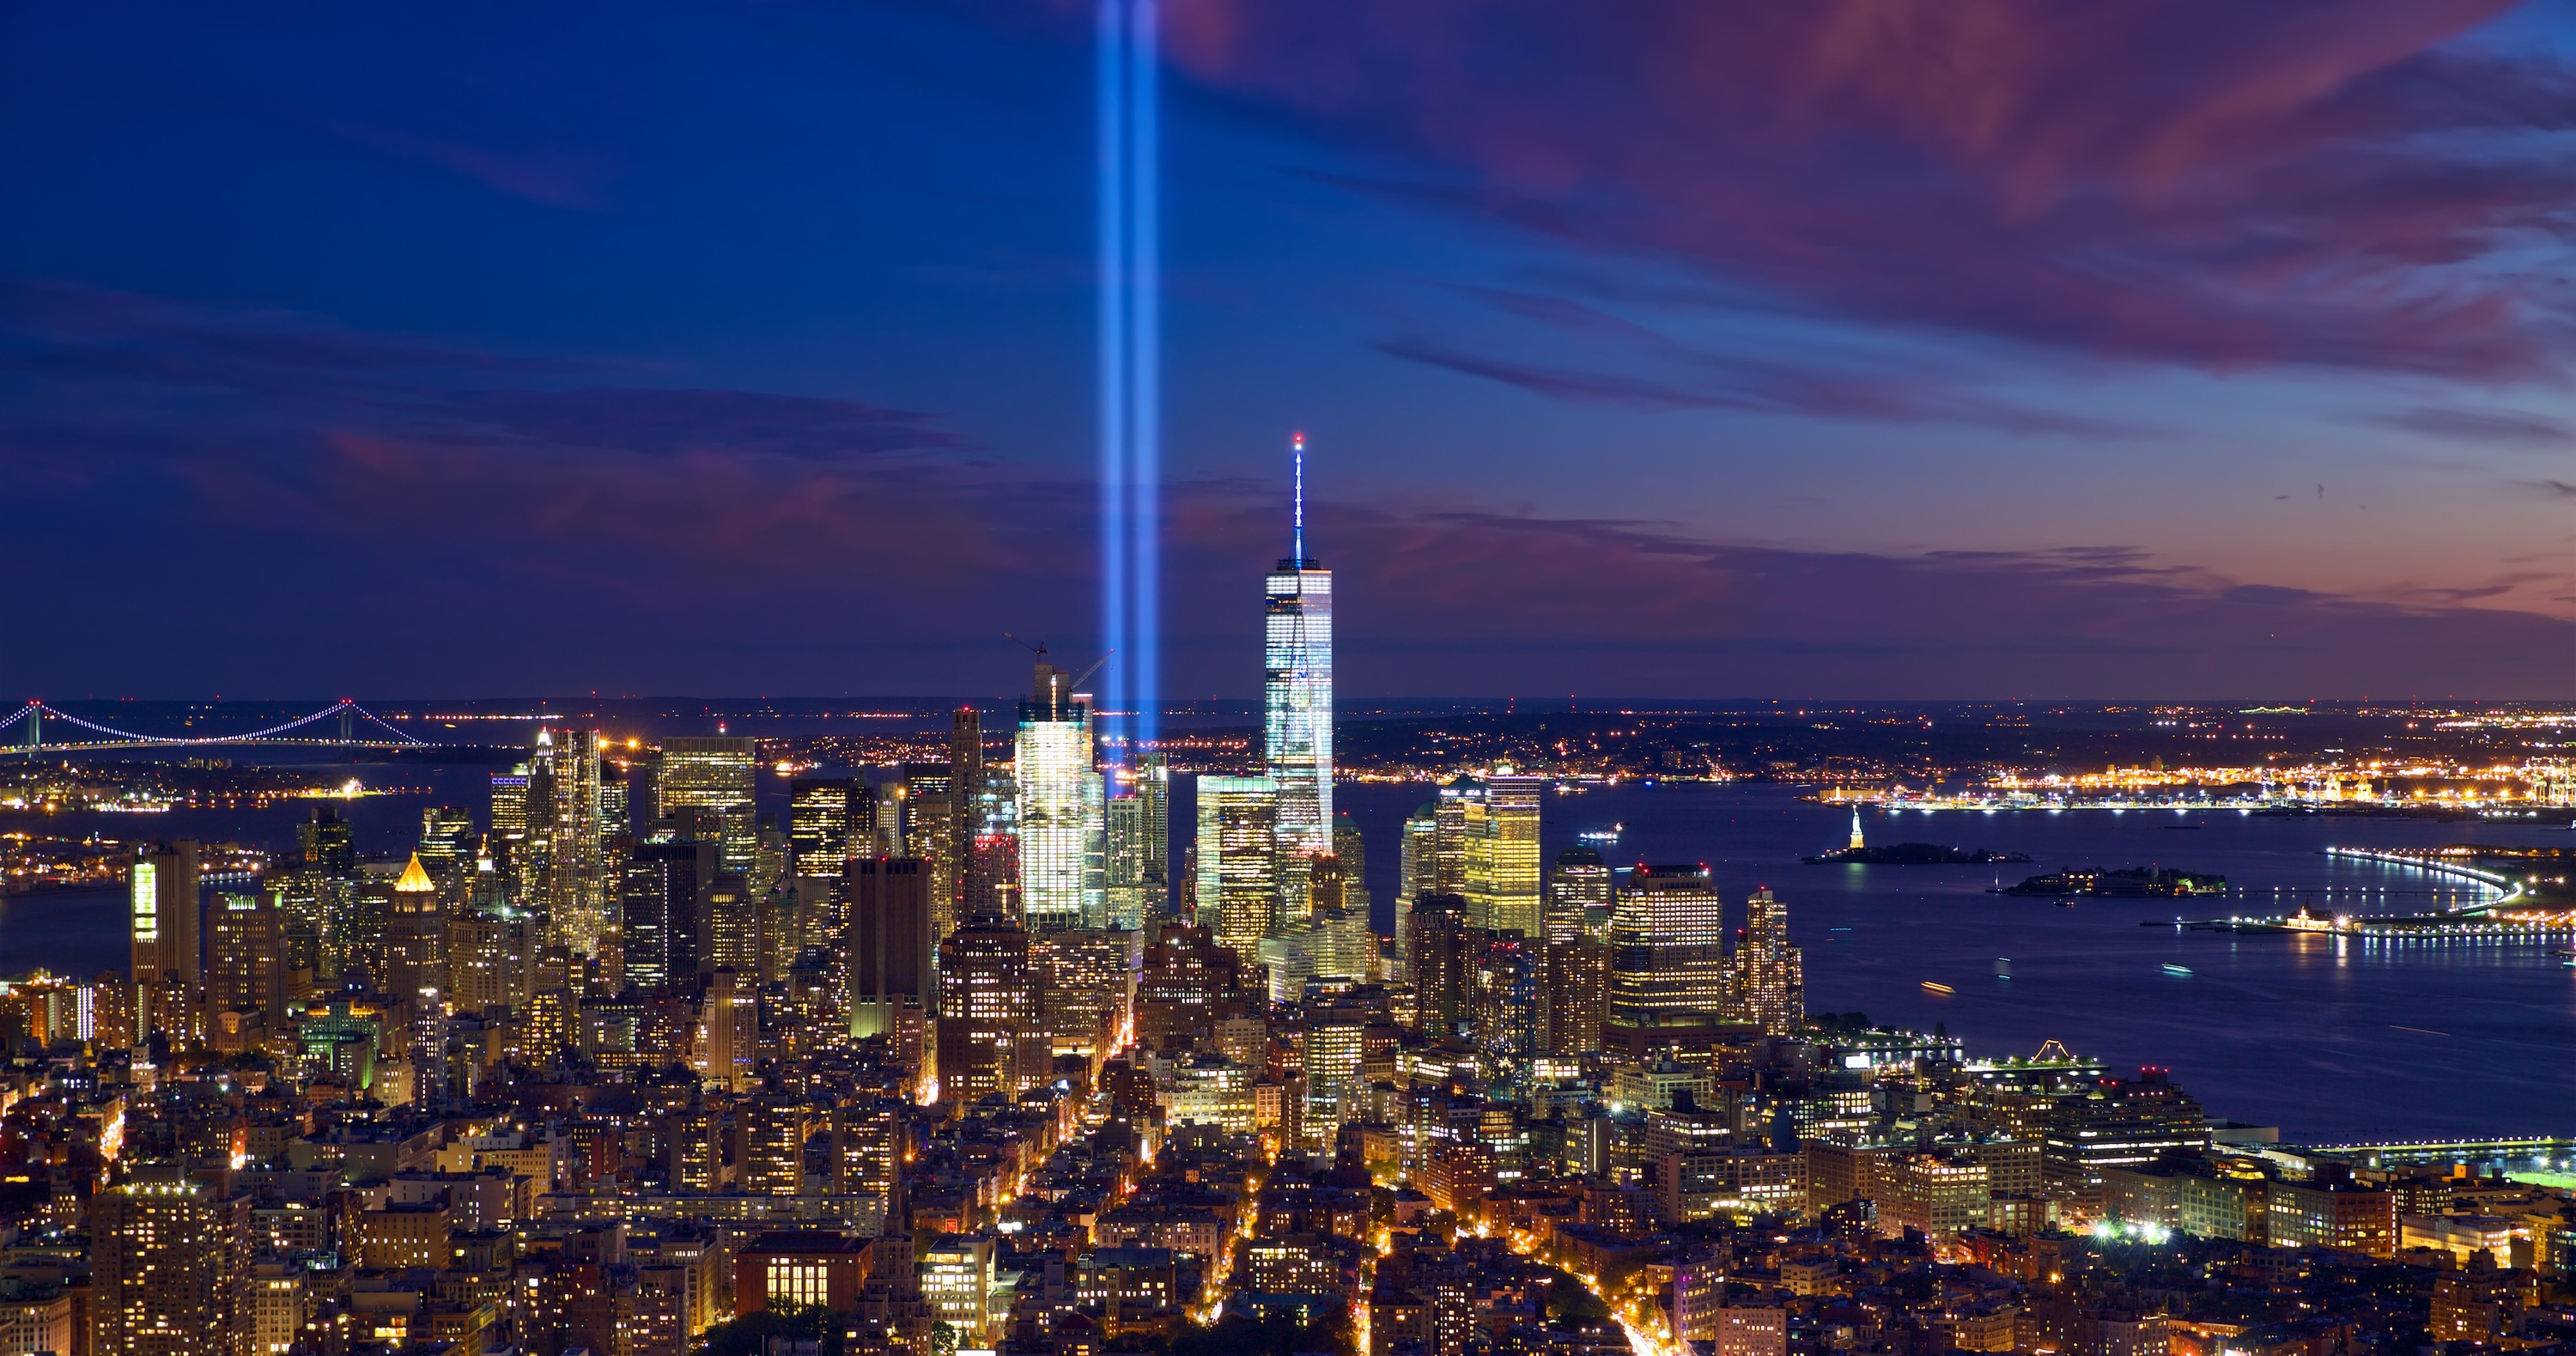 The 9/11 tribute lights have returned to NYC